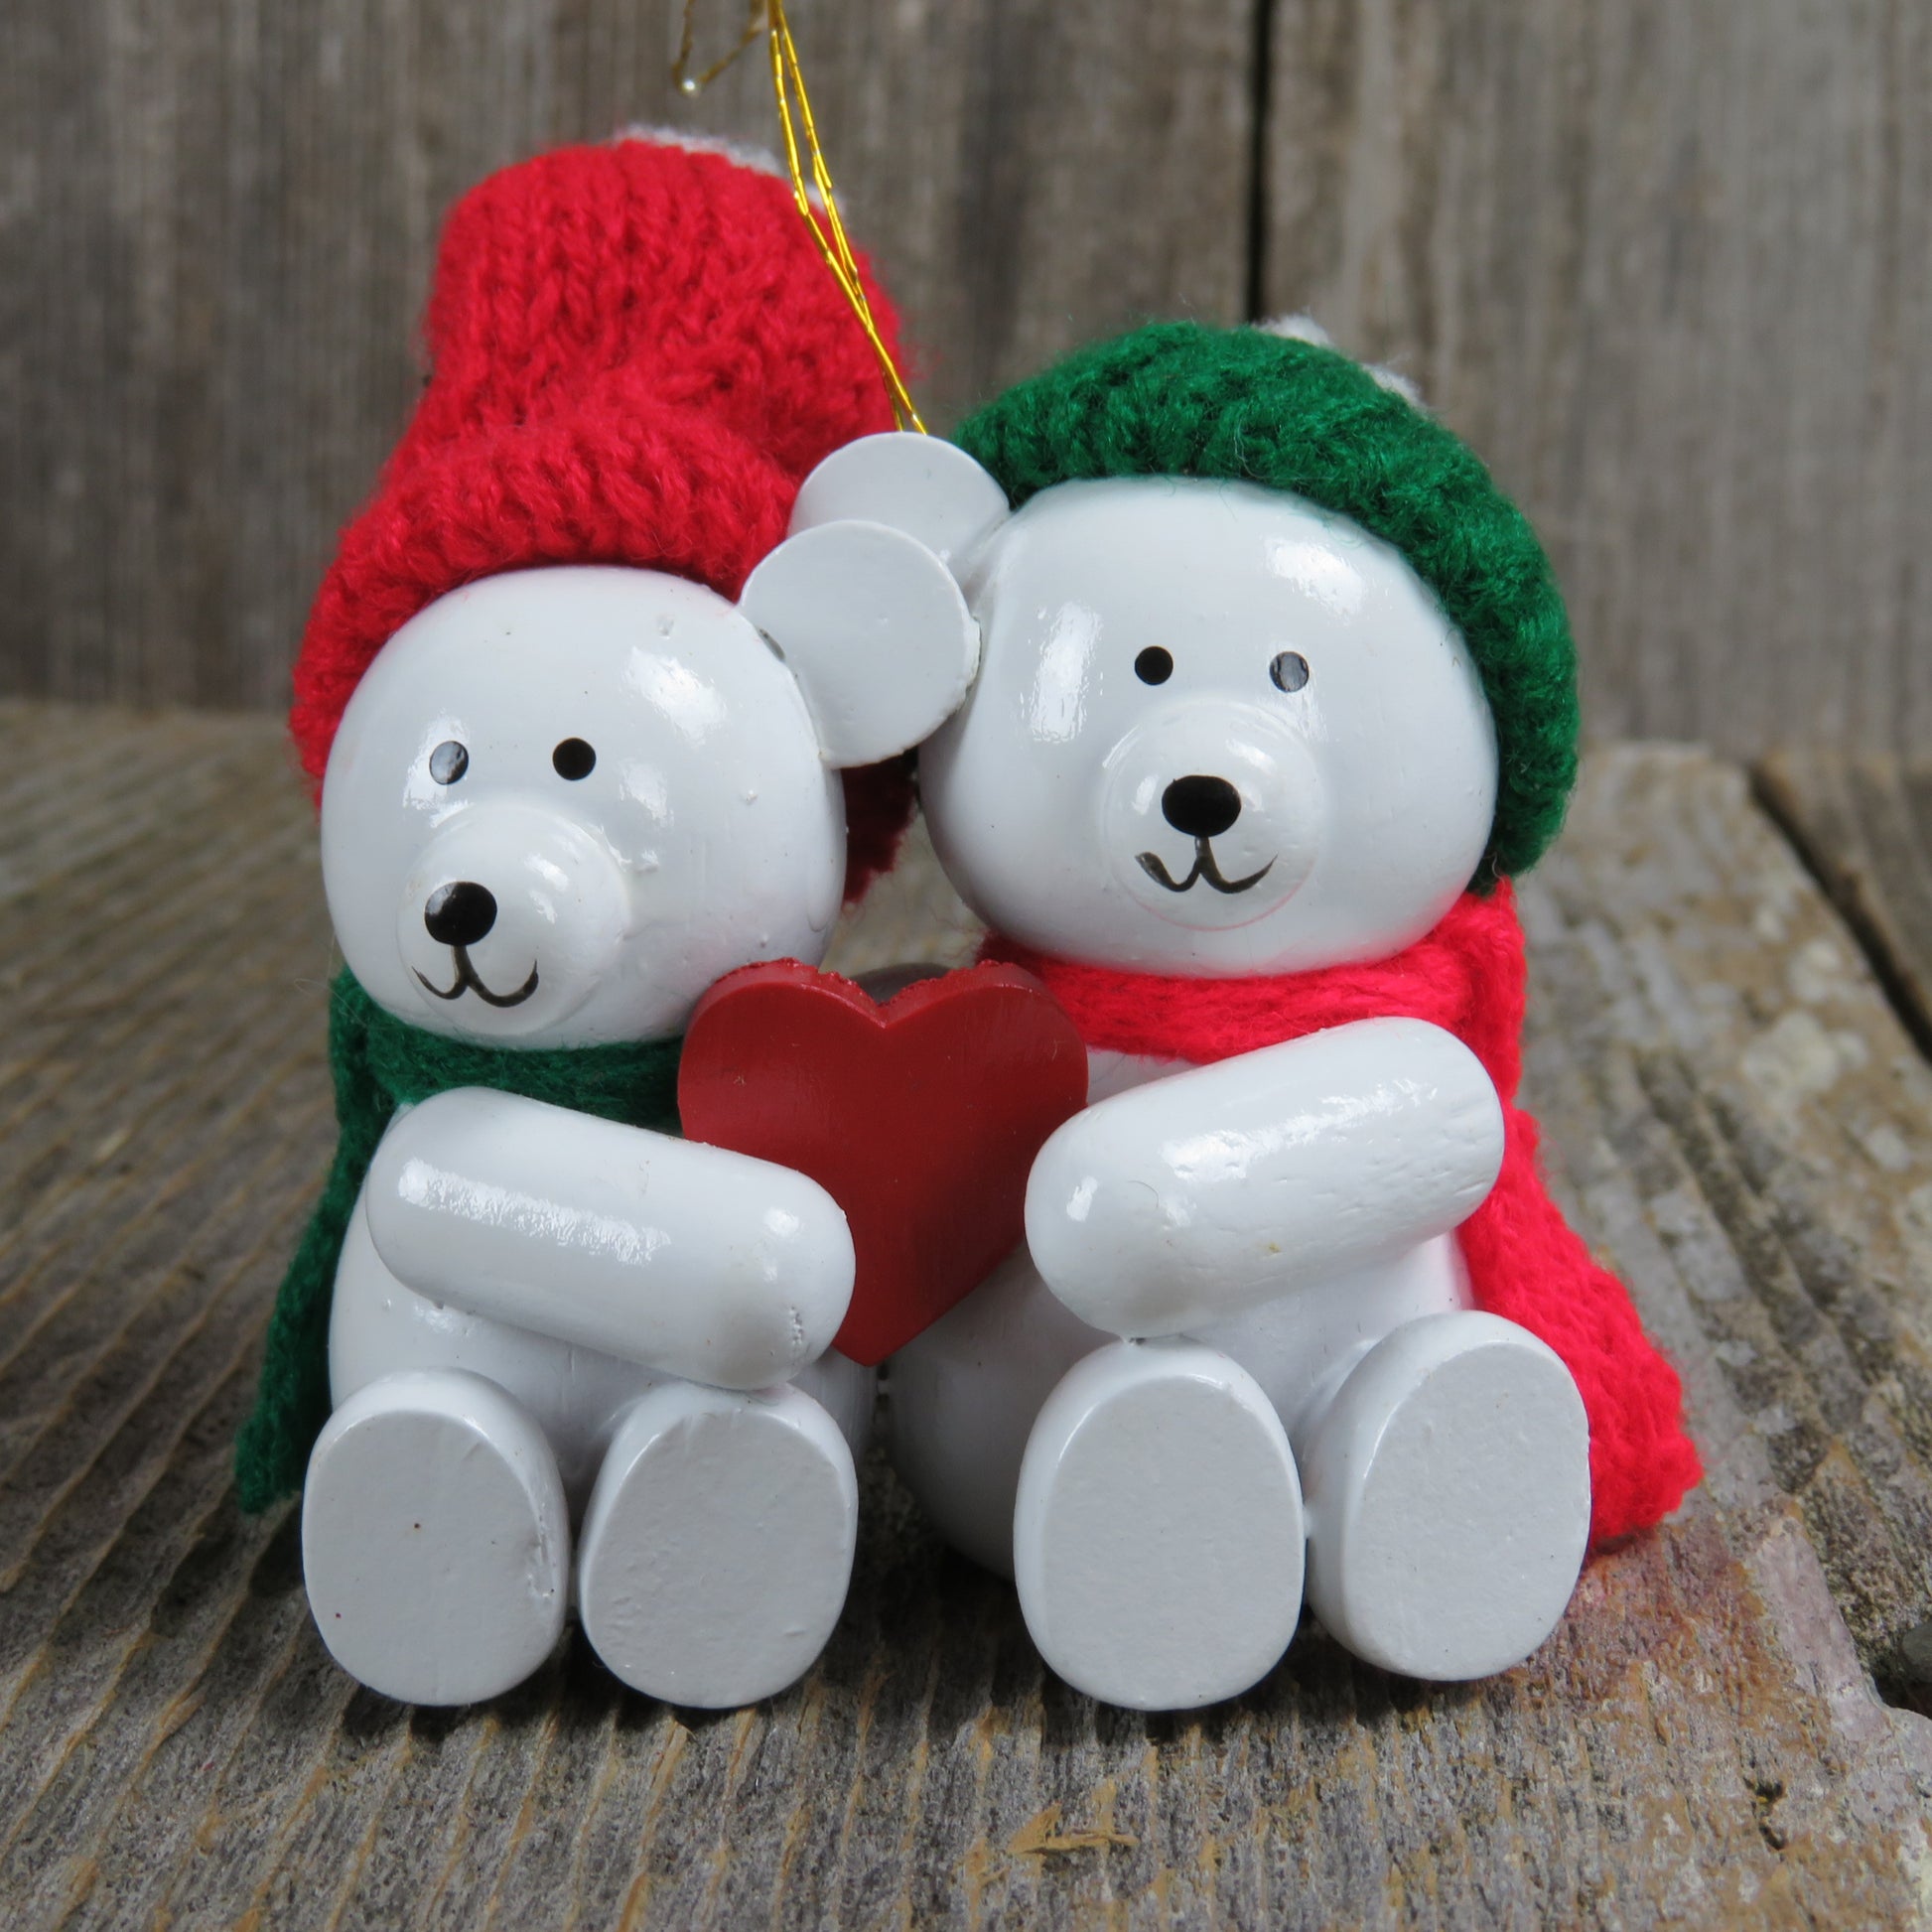 Vintage Sweetheart Teddy Bears Wood Christmas Ornament Heart Wooden Knit Hat - At Grandma's Table